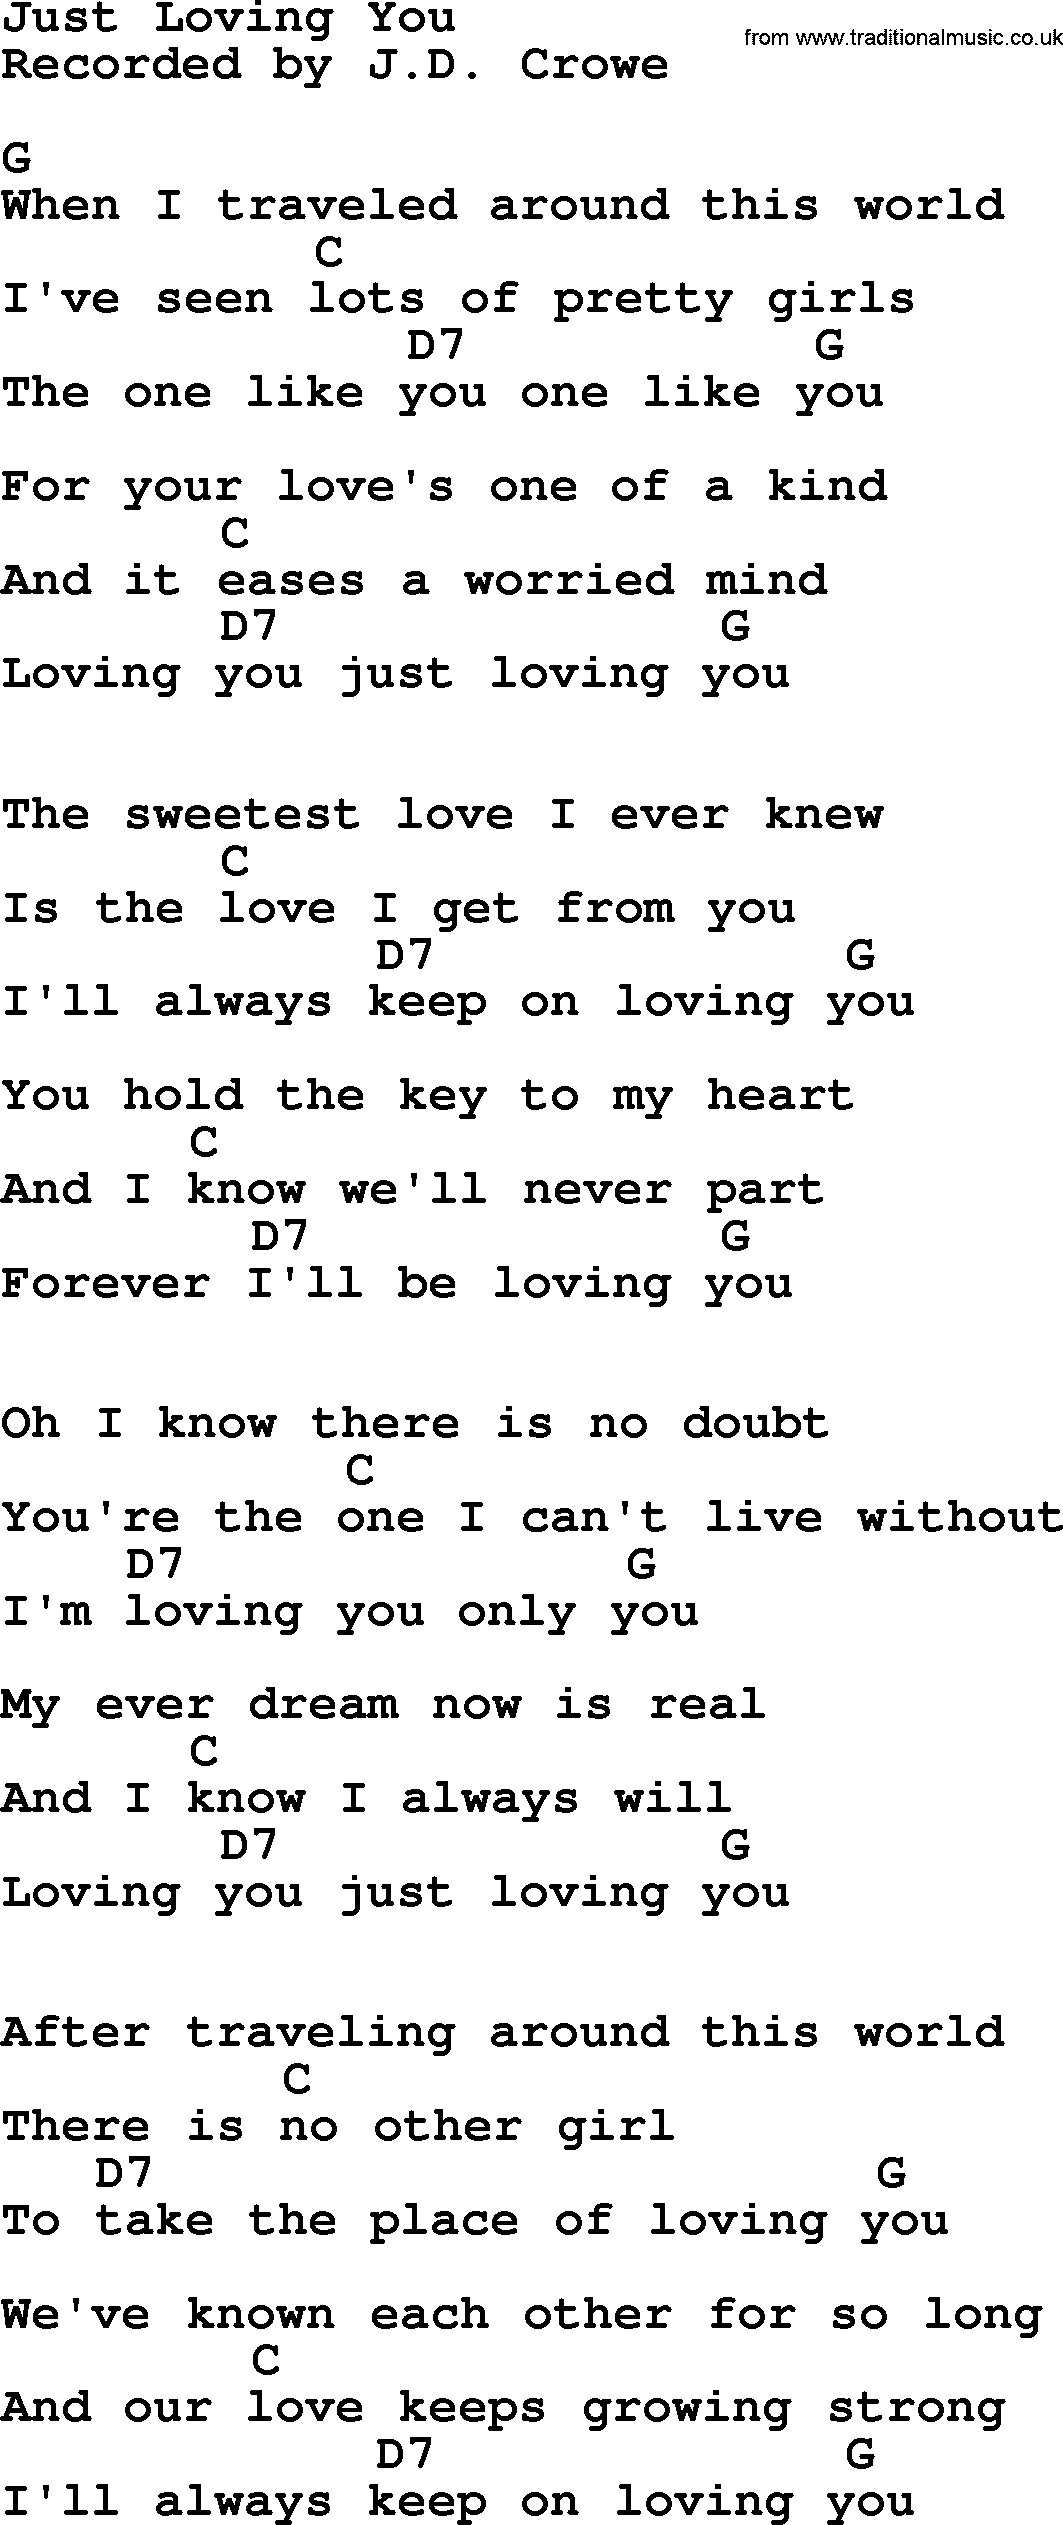 Bluegrass song: Just Loving You, lyrics and chords